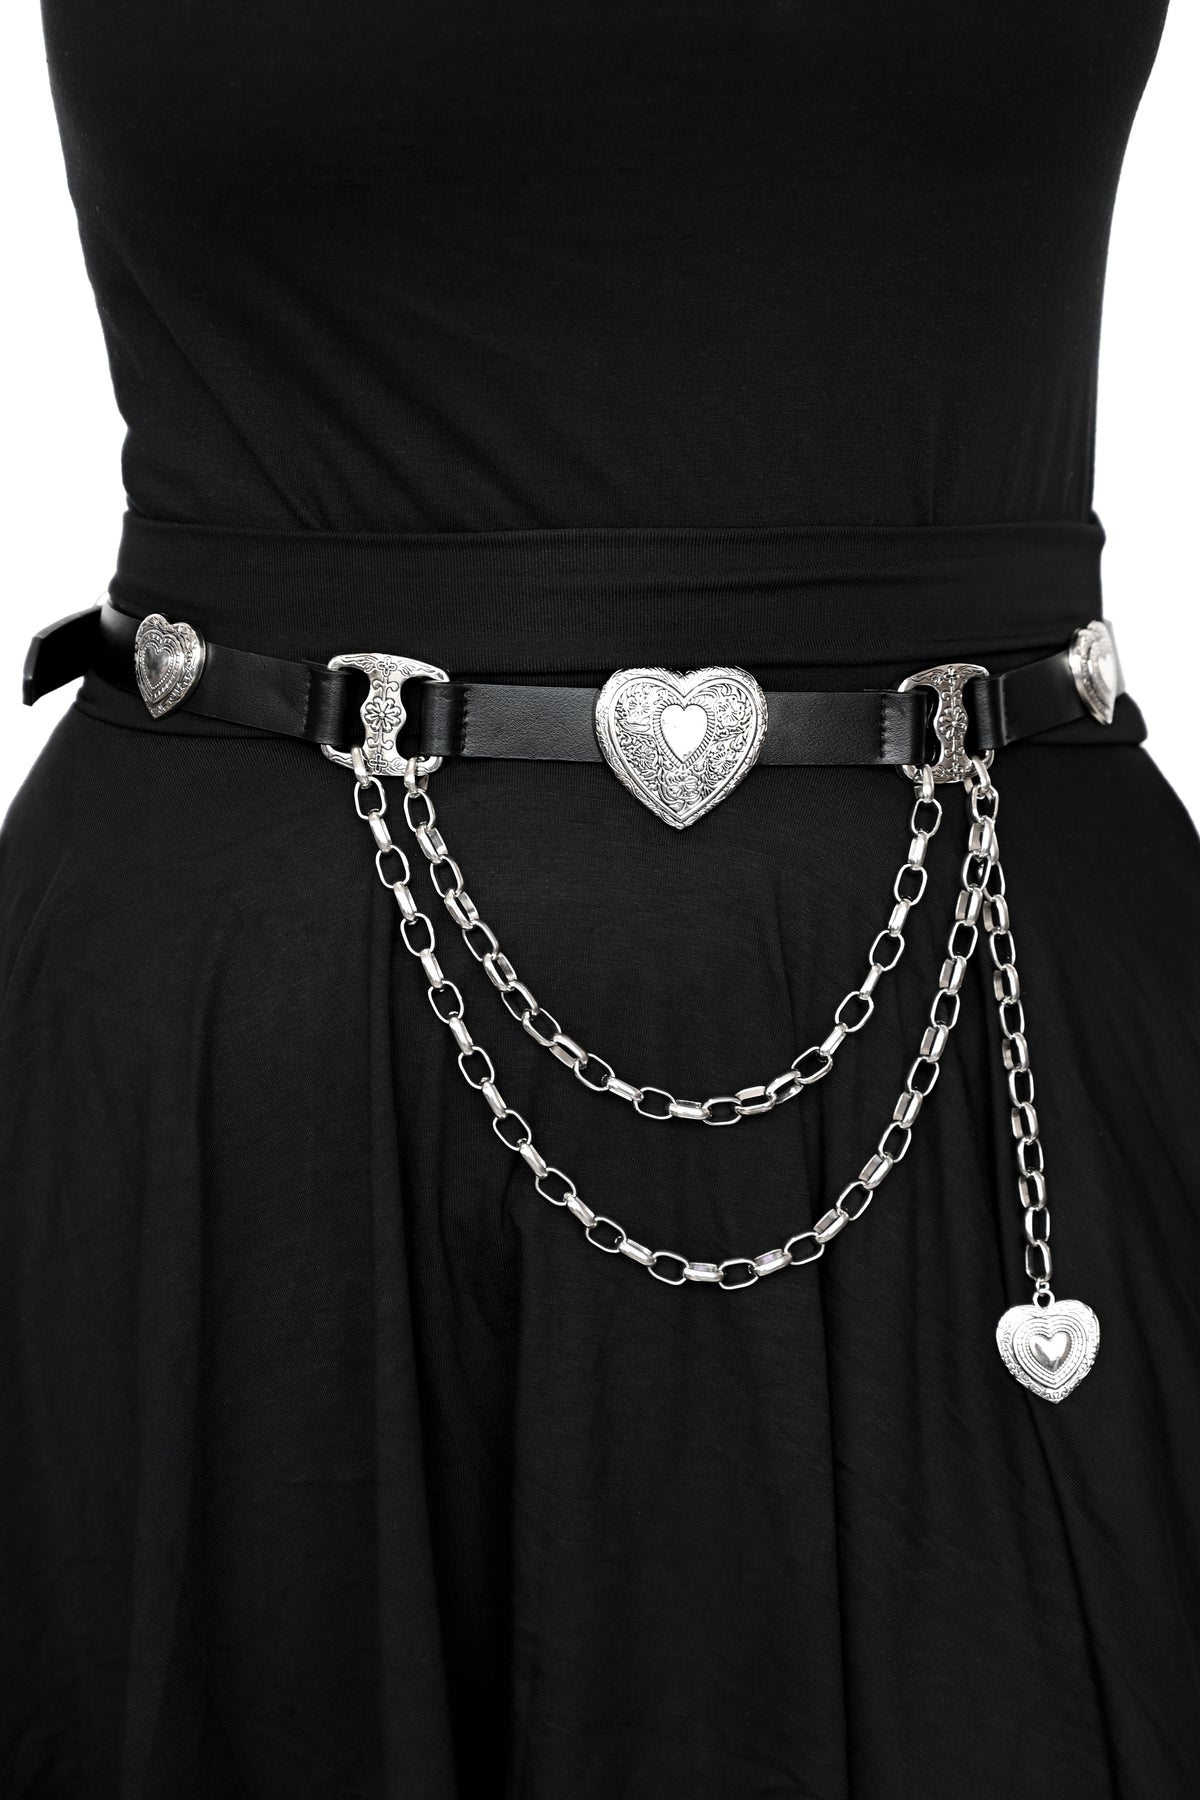 Vegan leather buckle belt with detailed hearts and chains.. Black vegan leather with silver metal